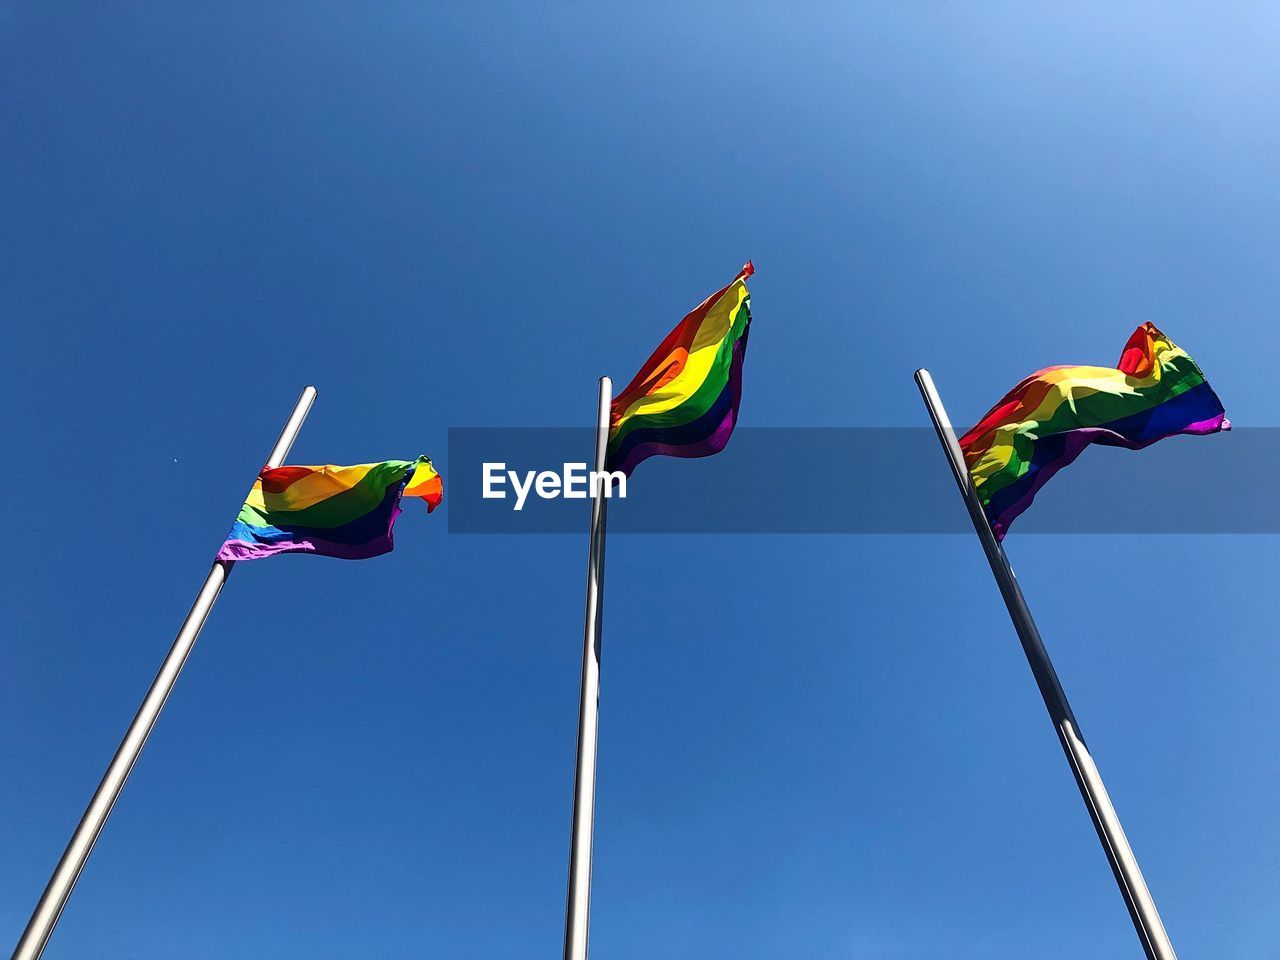 Low angle view of rainbow flags against clear blue sky